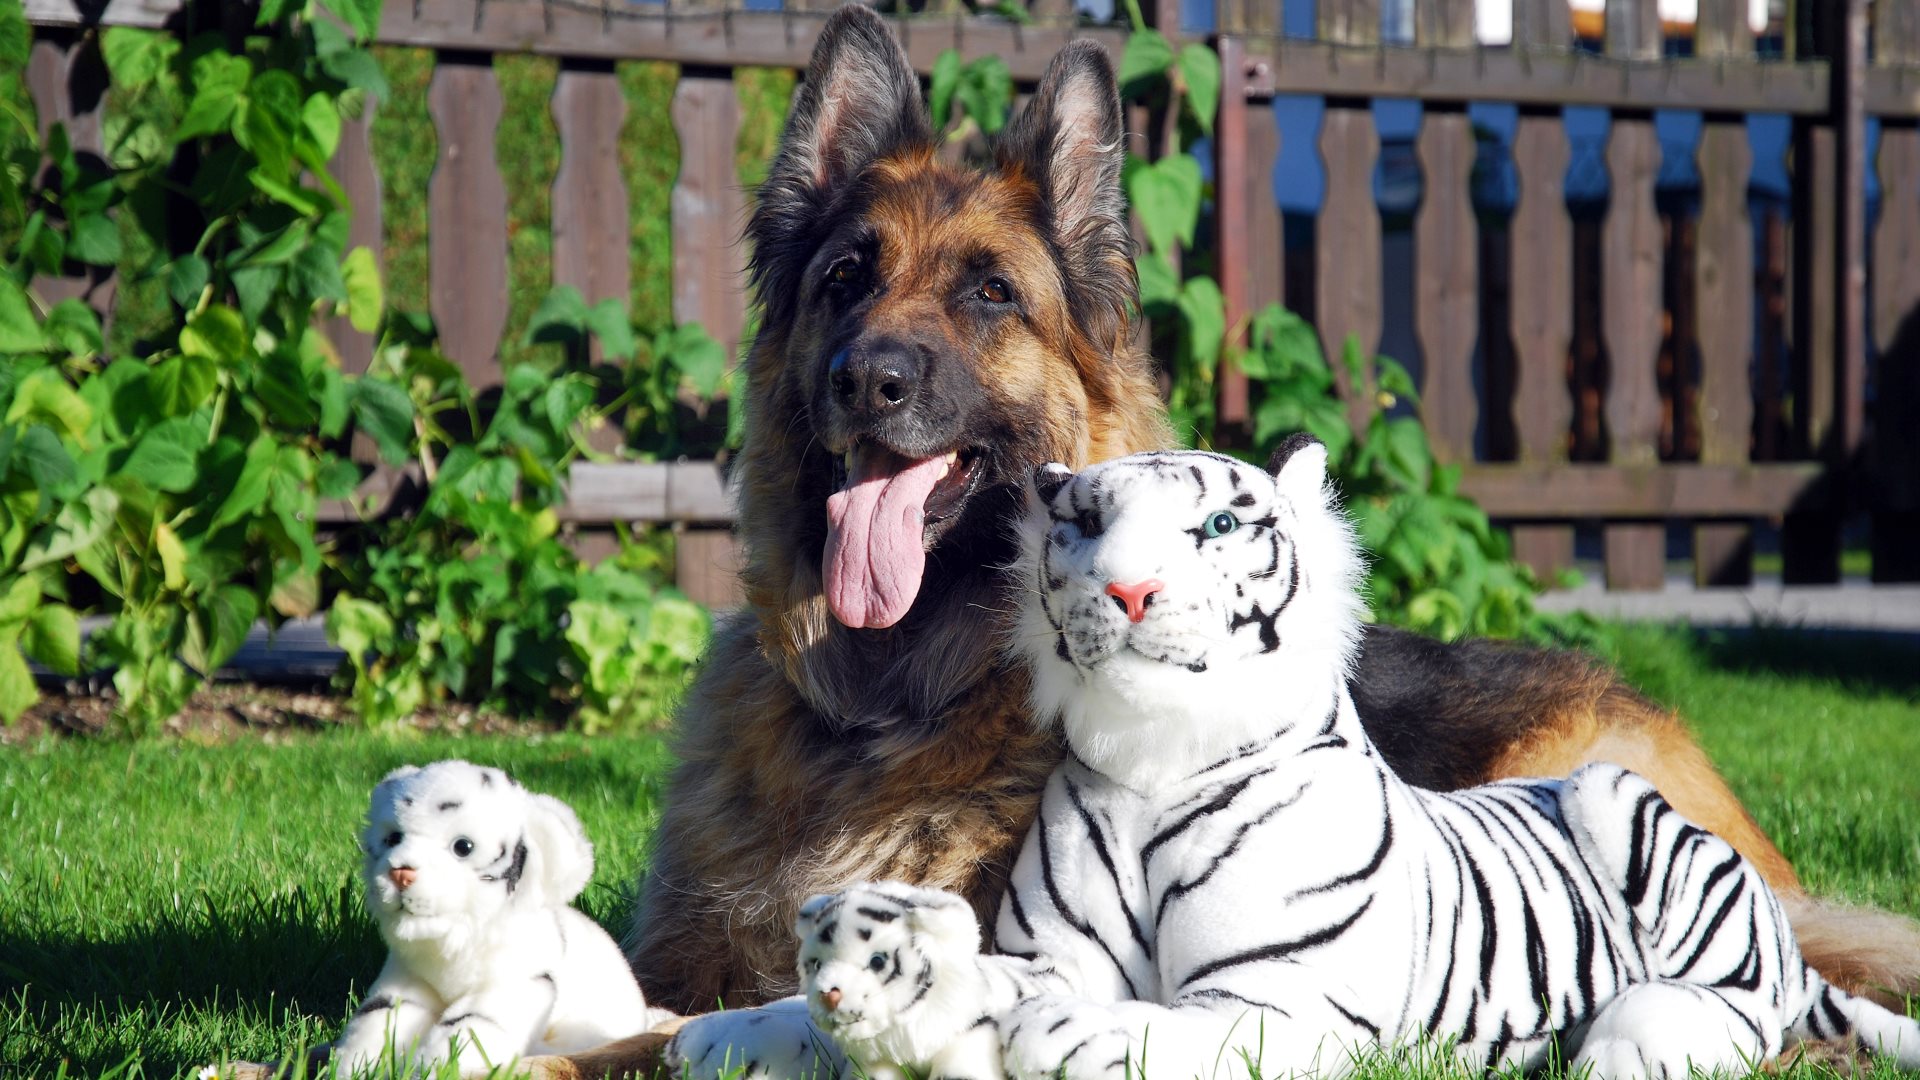 A Long Haired German Shepherd with White Tiger stuffed toys by Werner B.